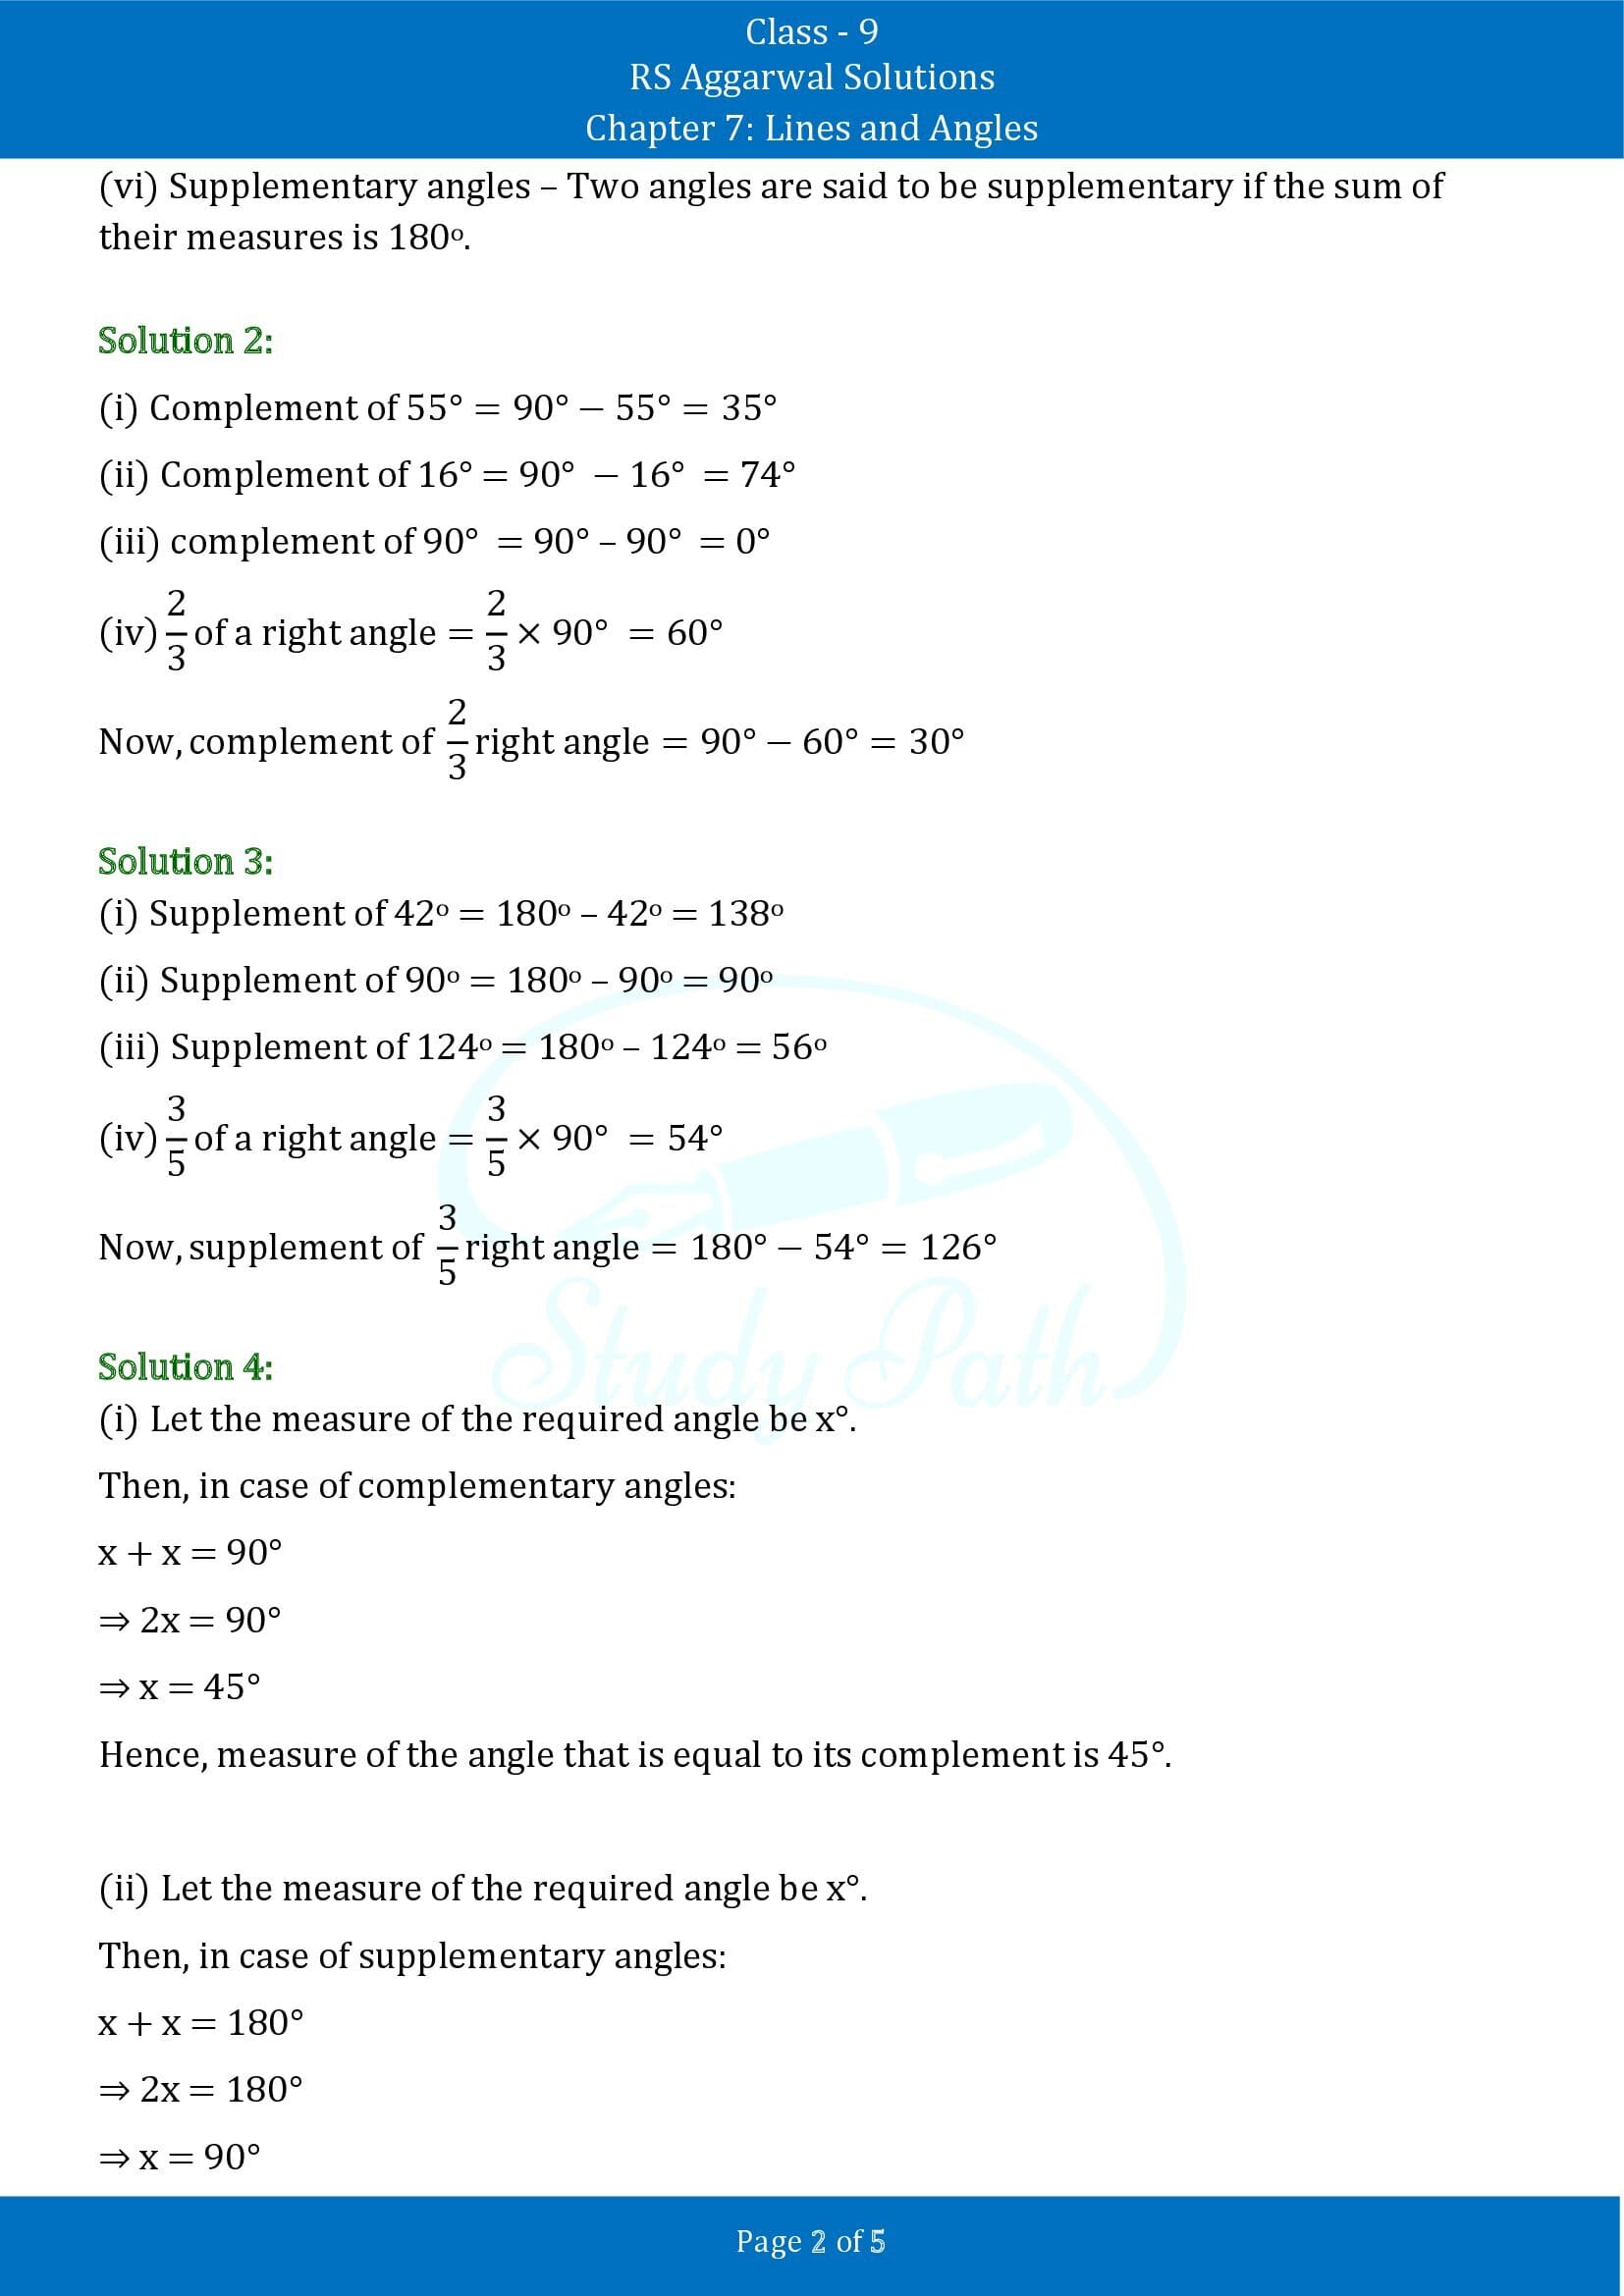 RS Aggarwal Solutions Class 9 Chapter 7 Lines and Angles Exercise 7A 00002